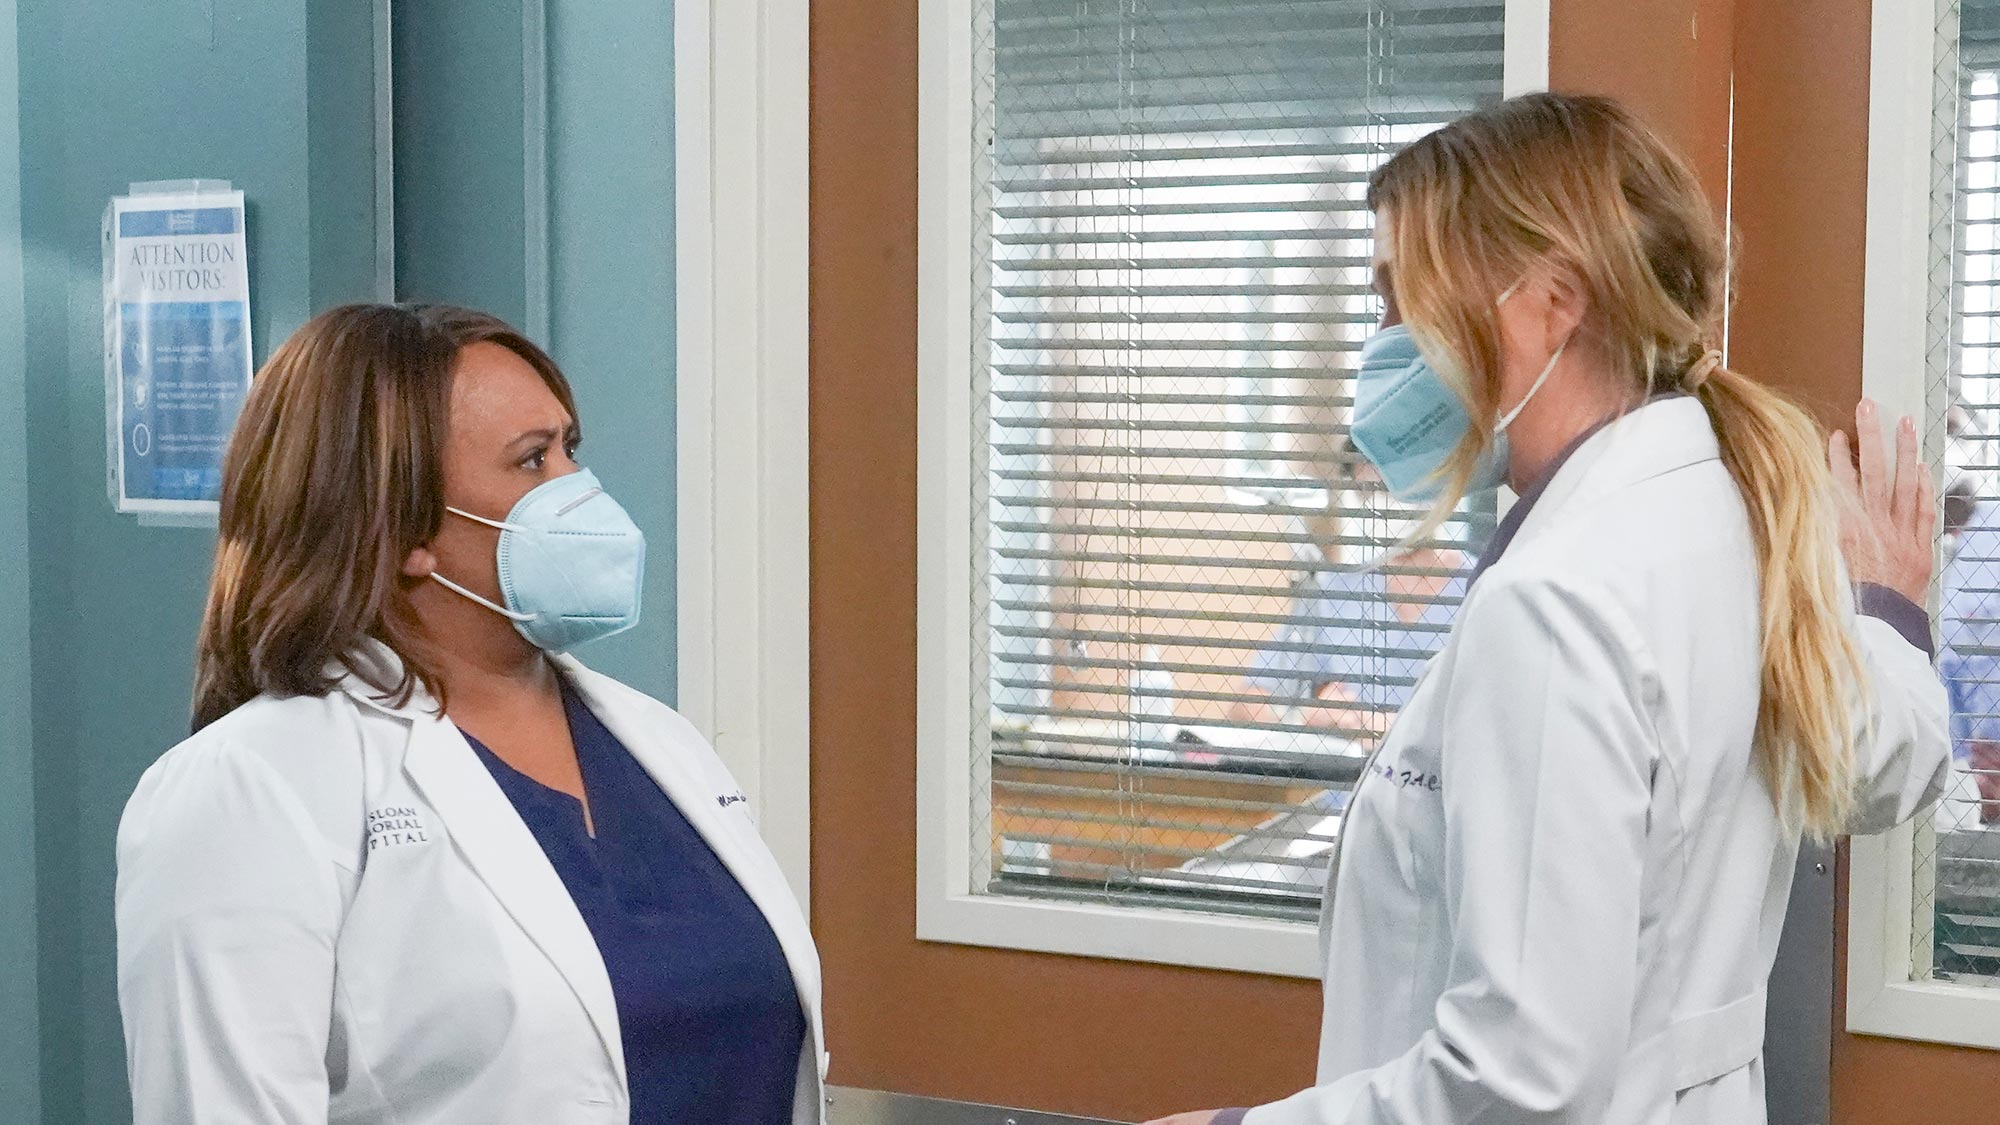 Grey’s Anatomy finale explained Who broke up, got engaged and got